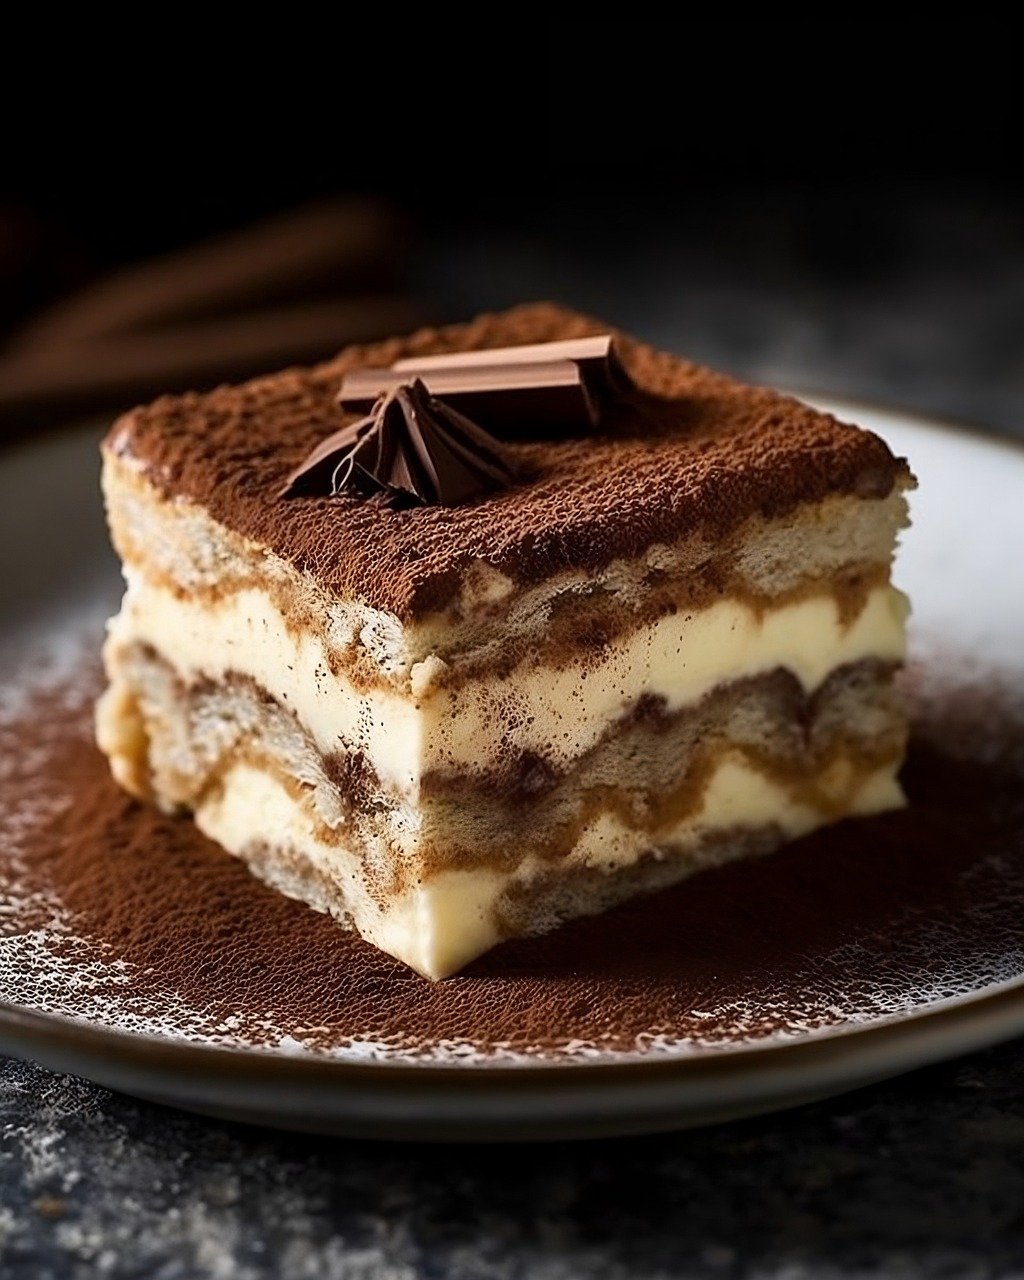 Tiramisu is one of our favorite dessert options in Cape Coral.